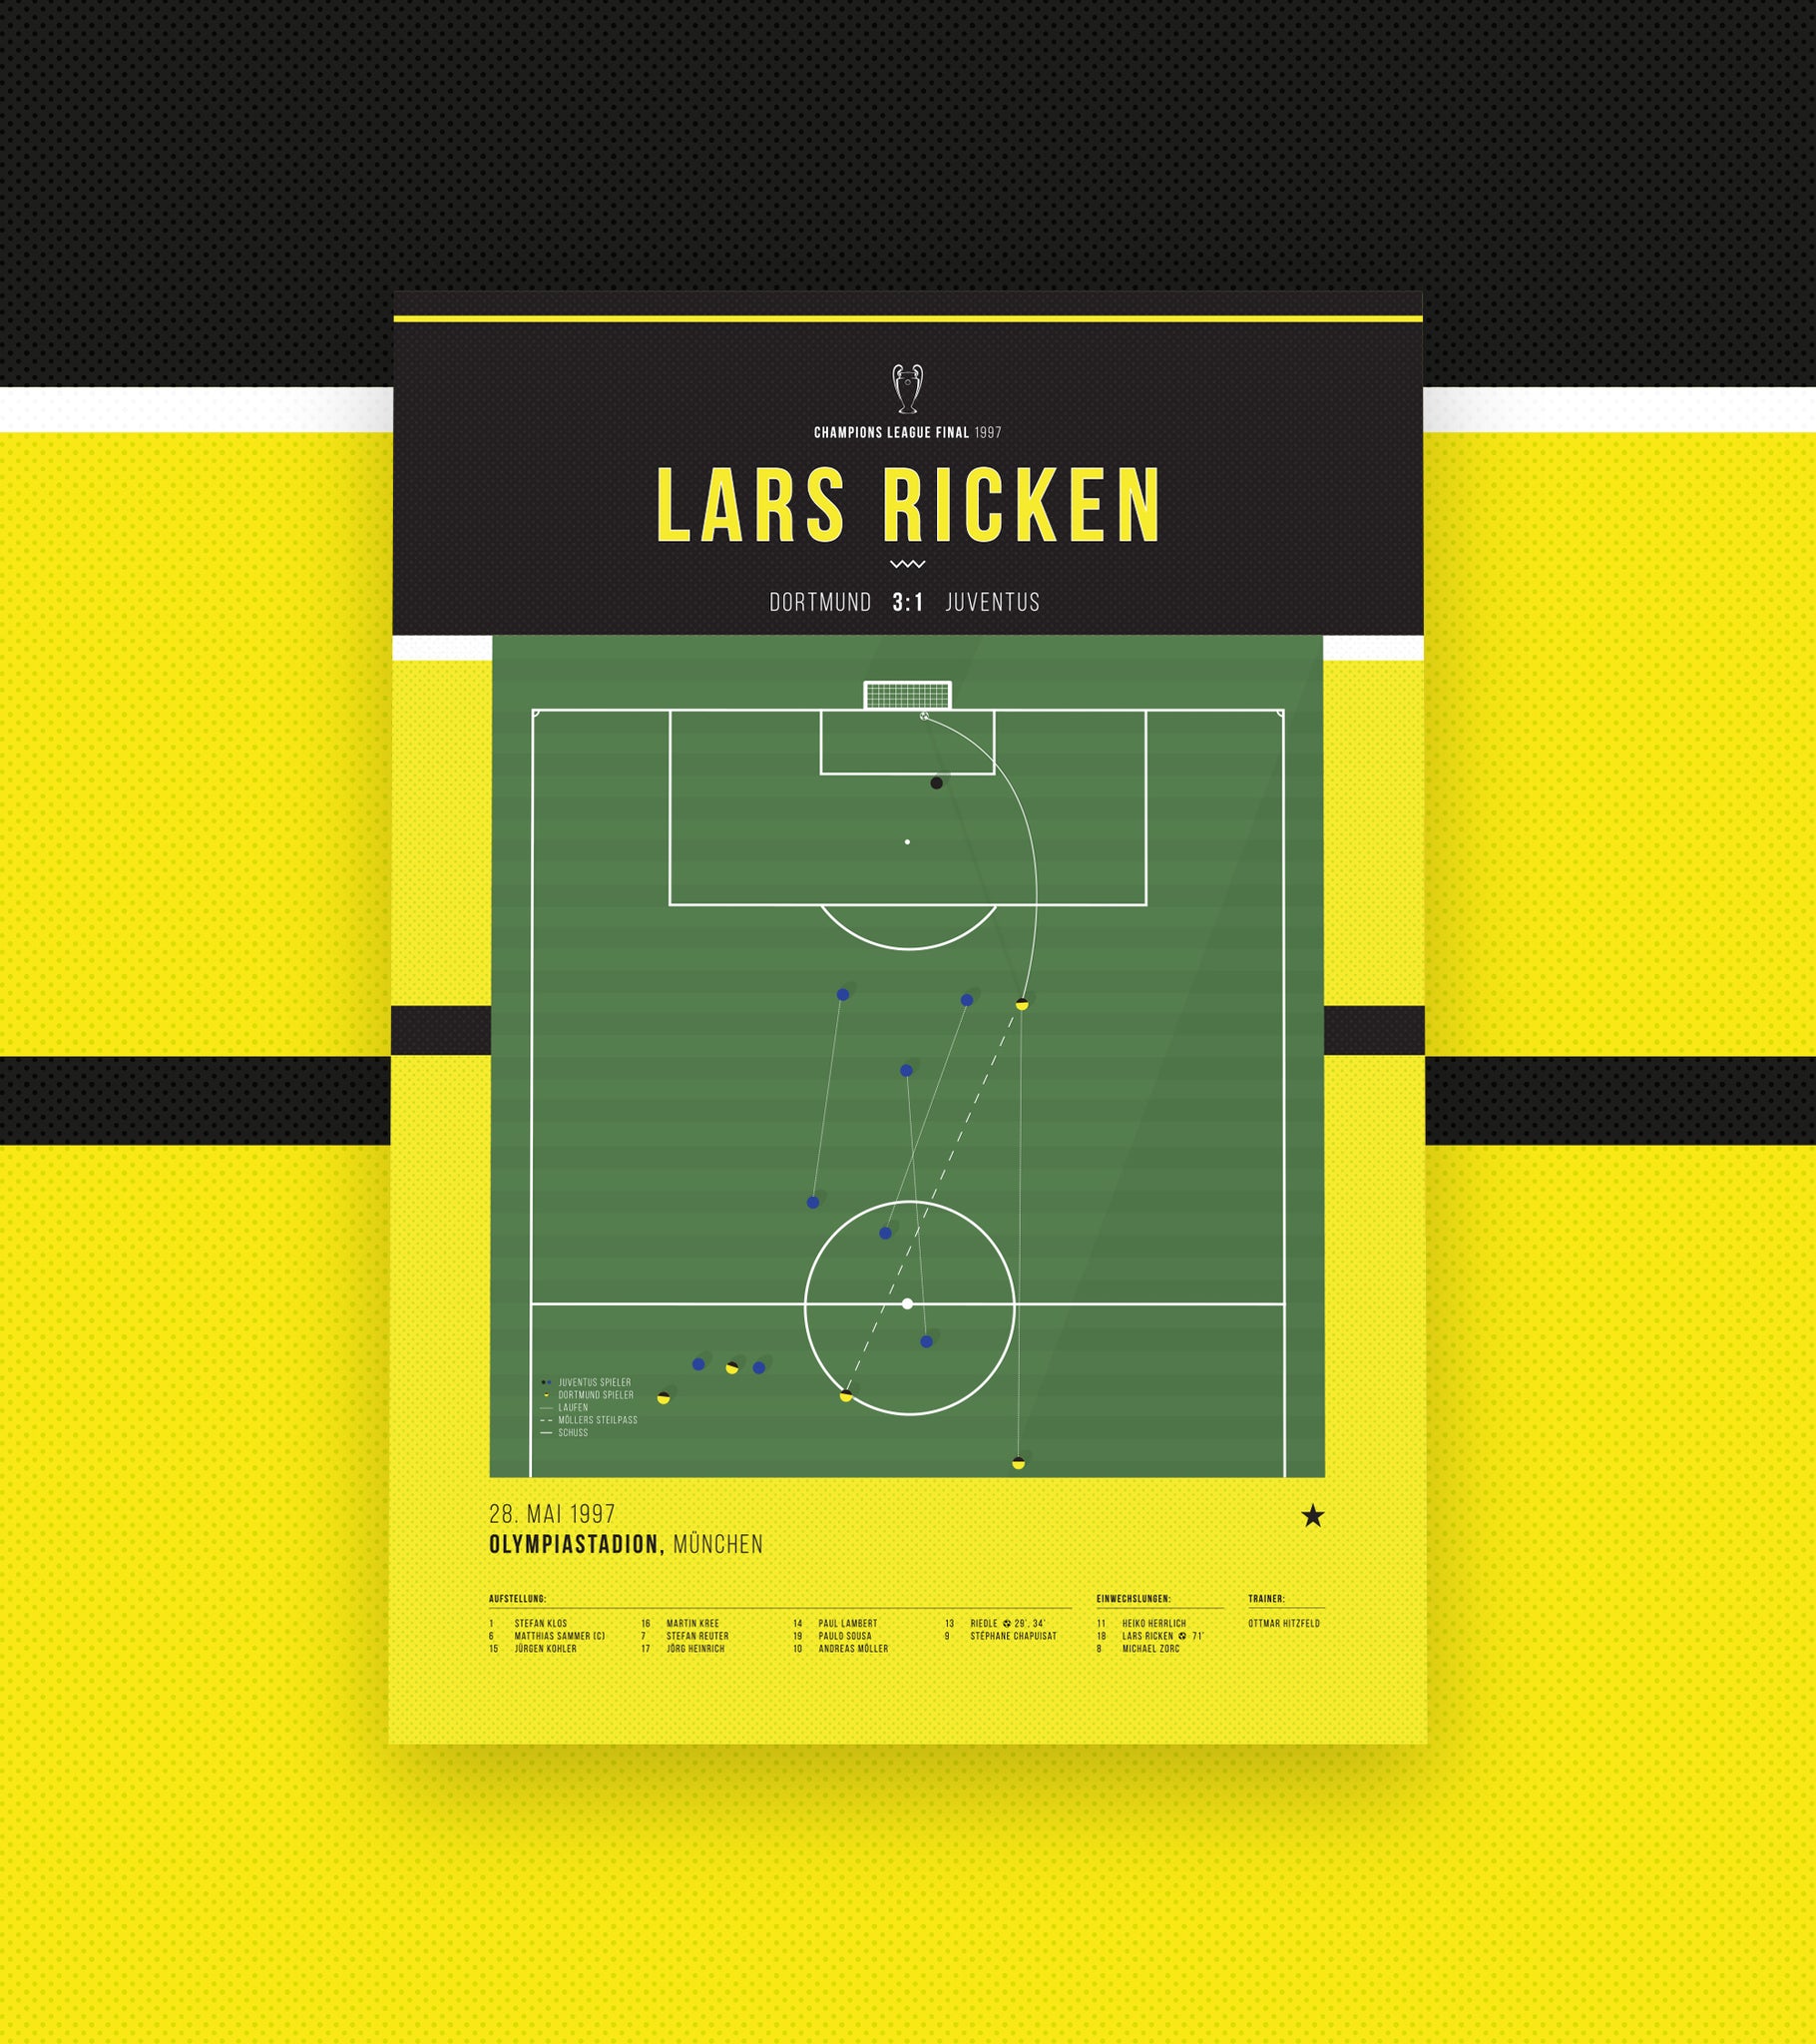 Lars Ricken Champions League Traumtor Goal Of Fame